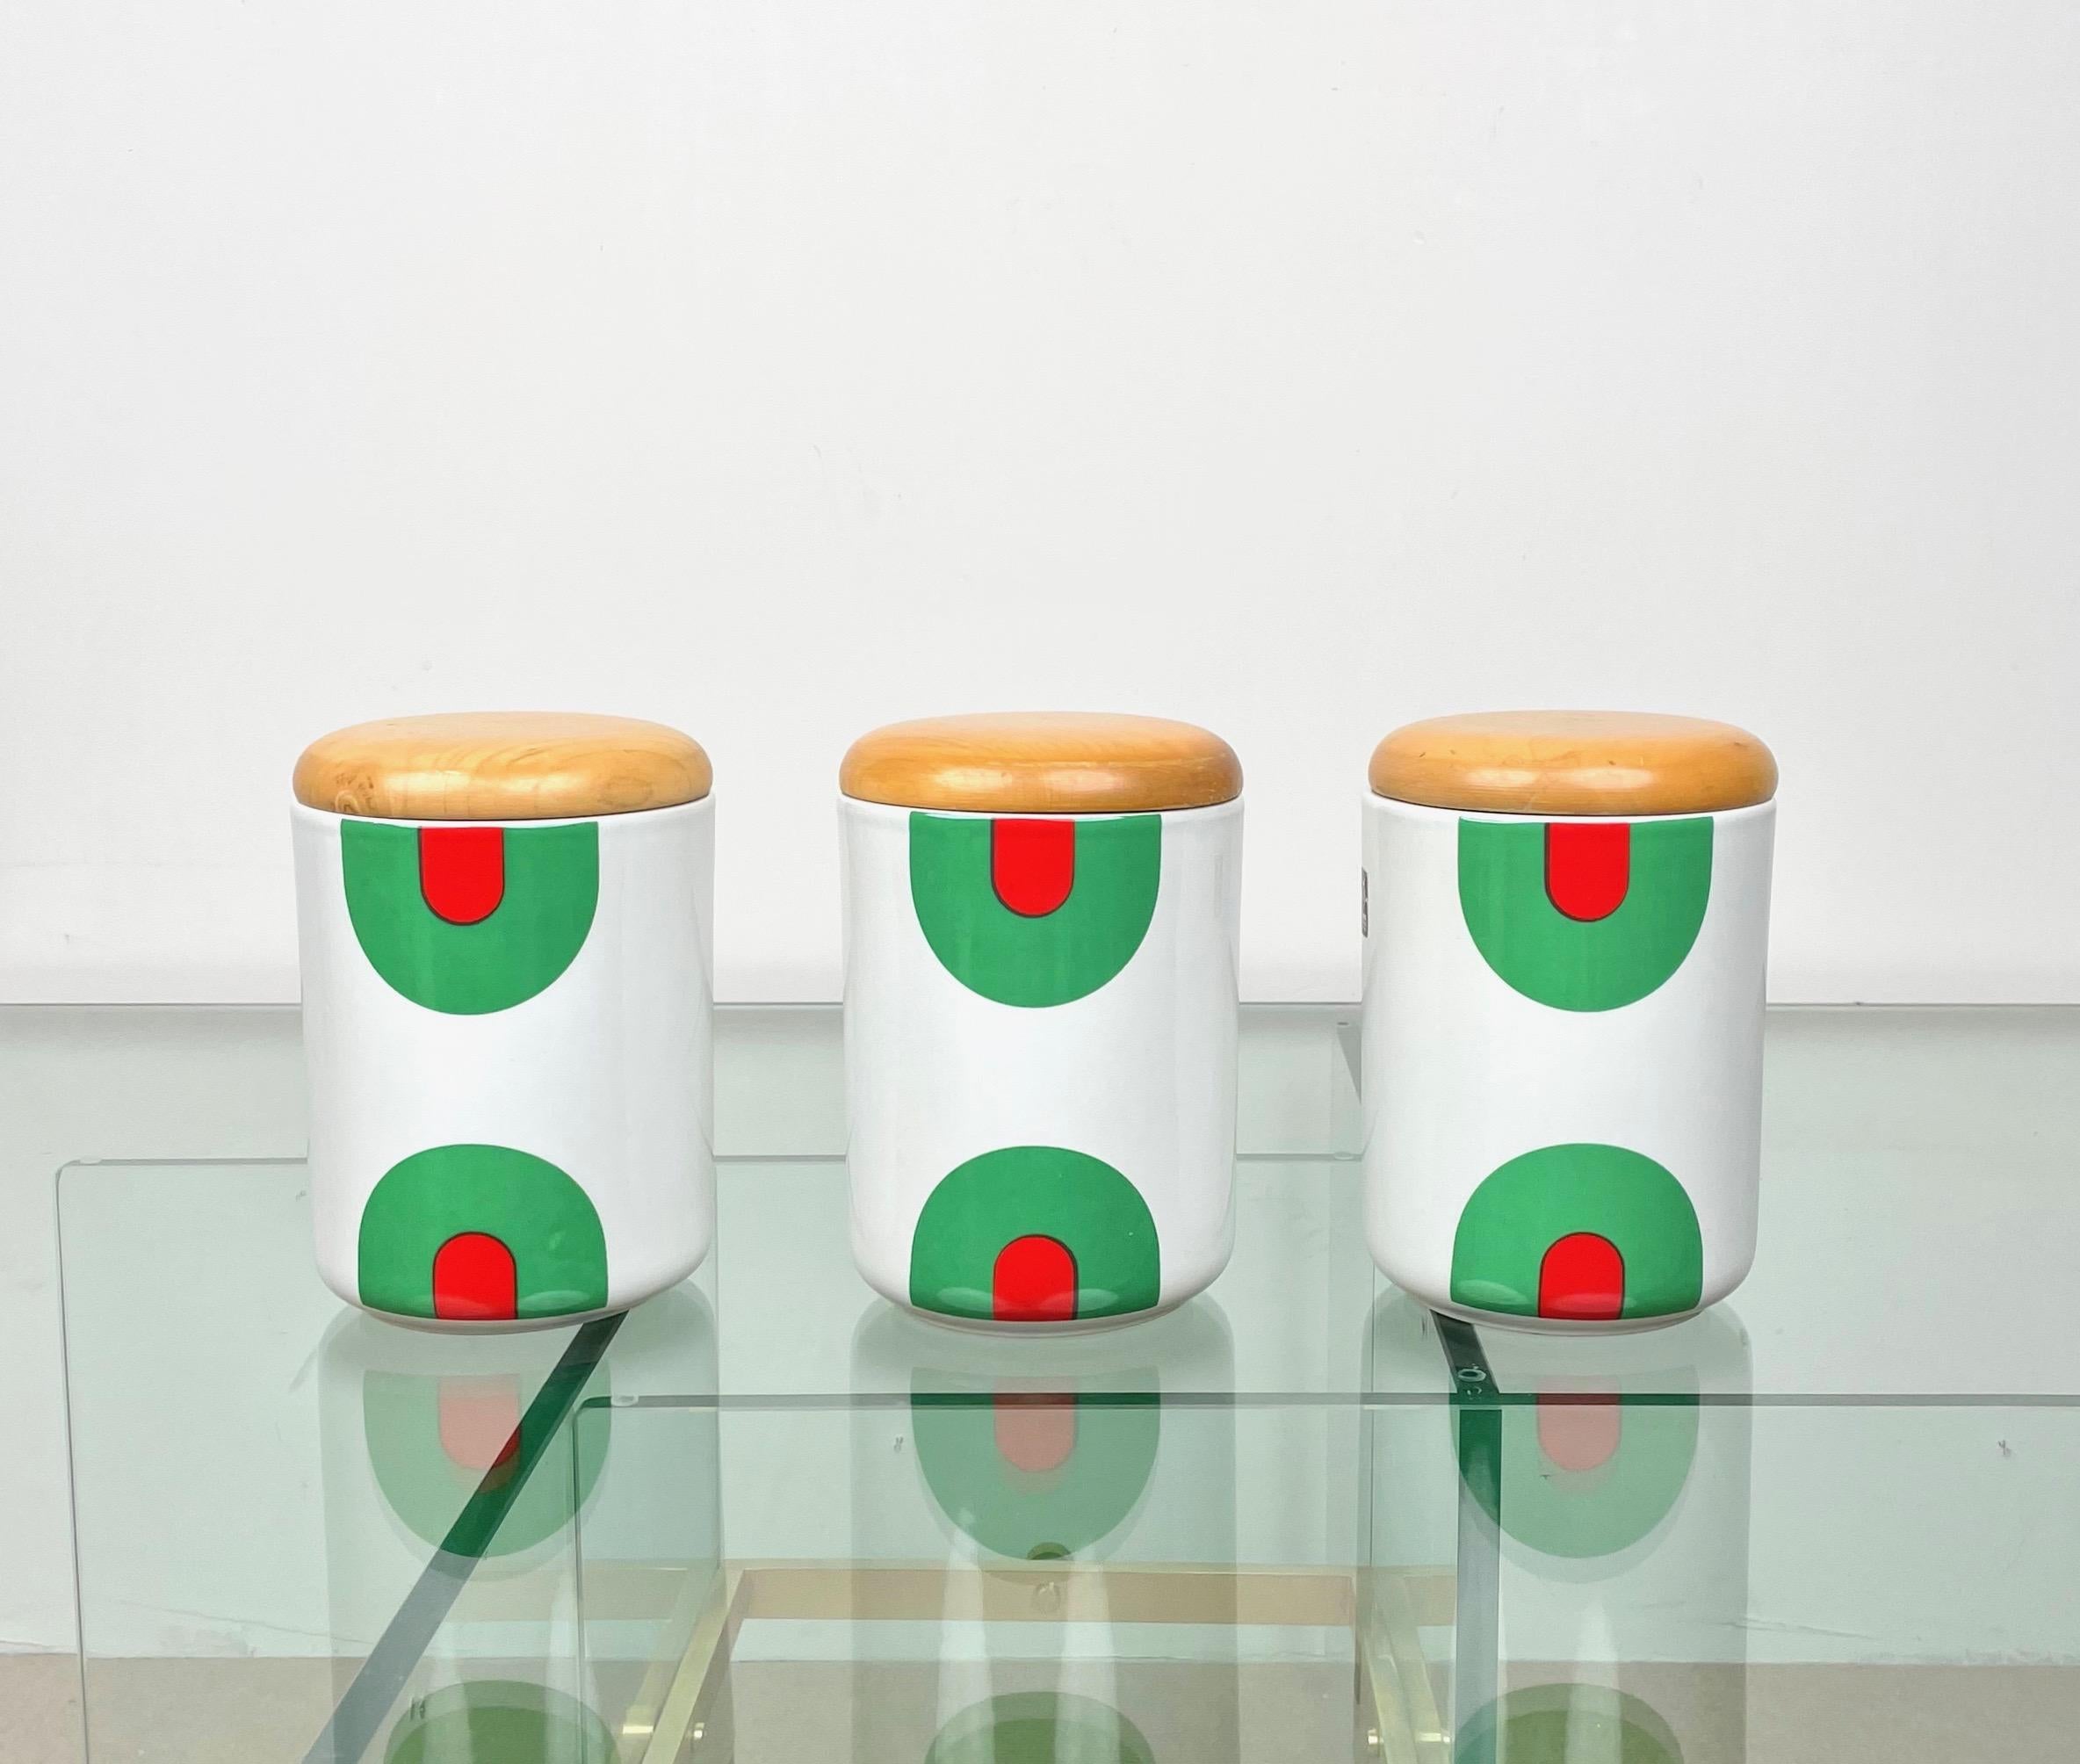 Set of three box vases in ceramic with wooden cover by the Italian designer Franco Pozzi. 

Made in Italy in the 1970s. 

The original signature is still visible on the bottom of the boxes, as shown in the pictures.